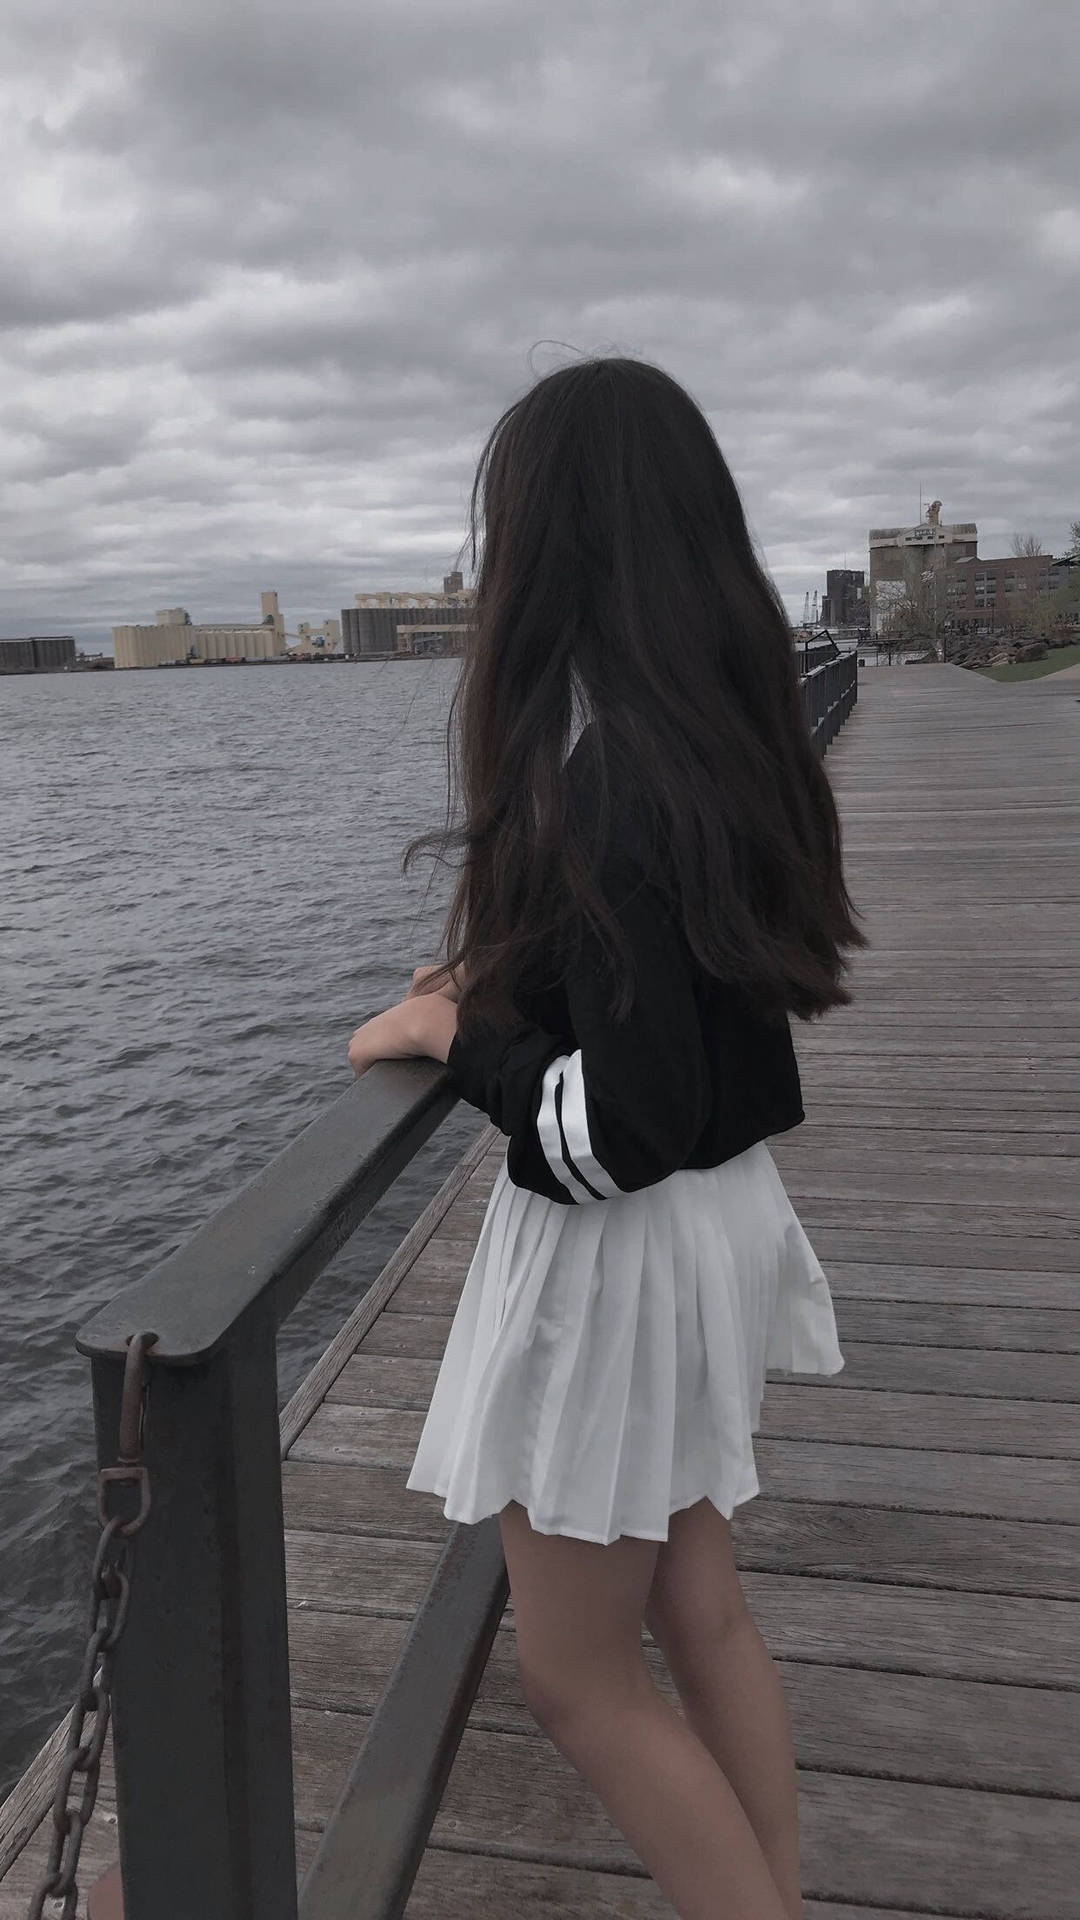 Girl Aesthetic At Boat Dock Background